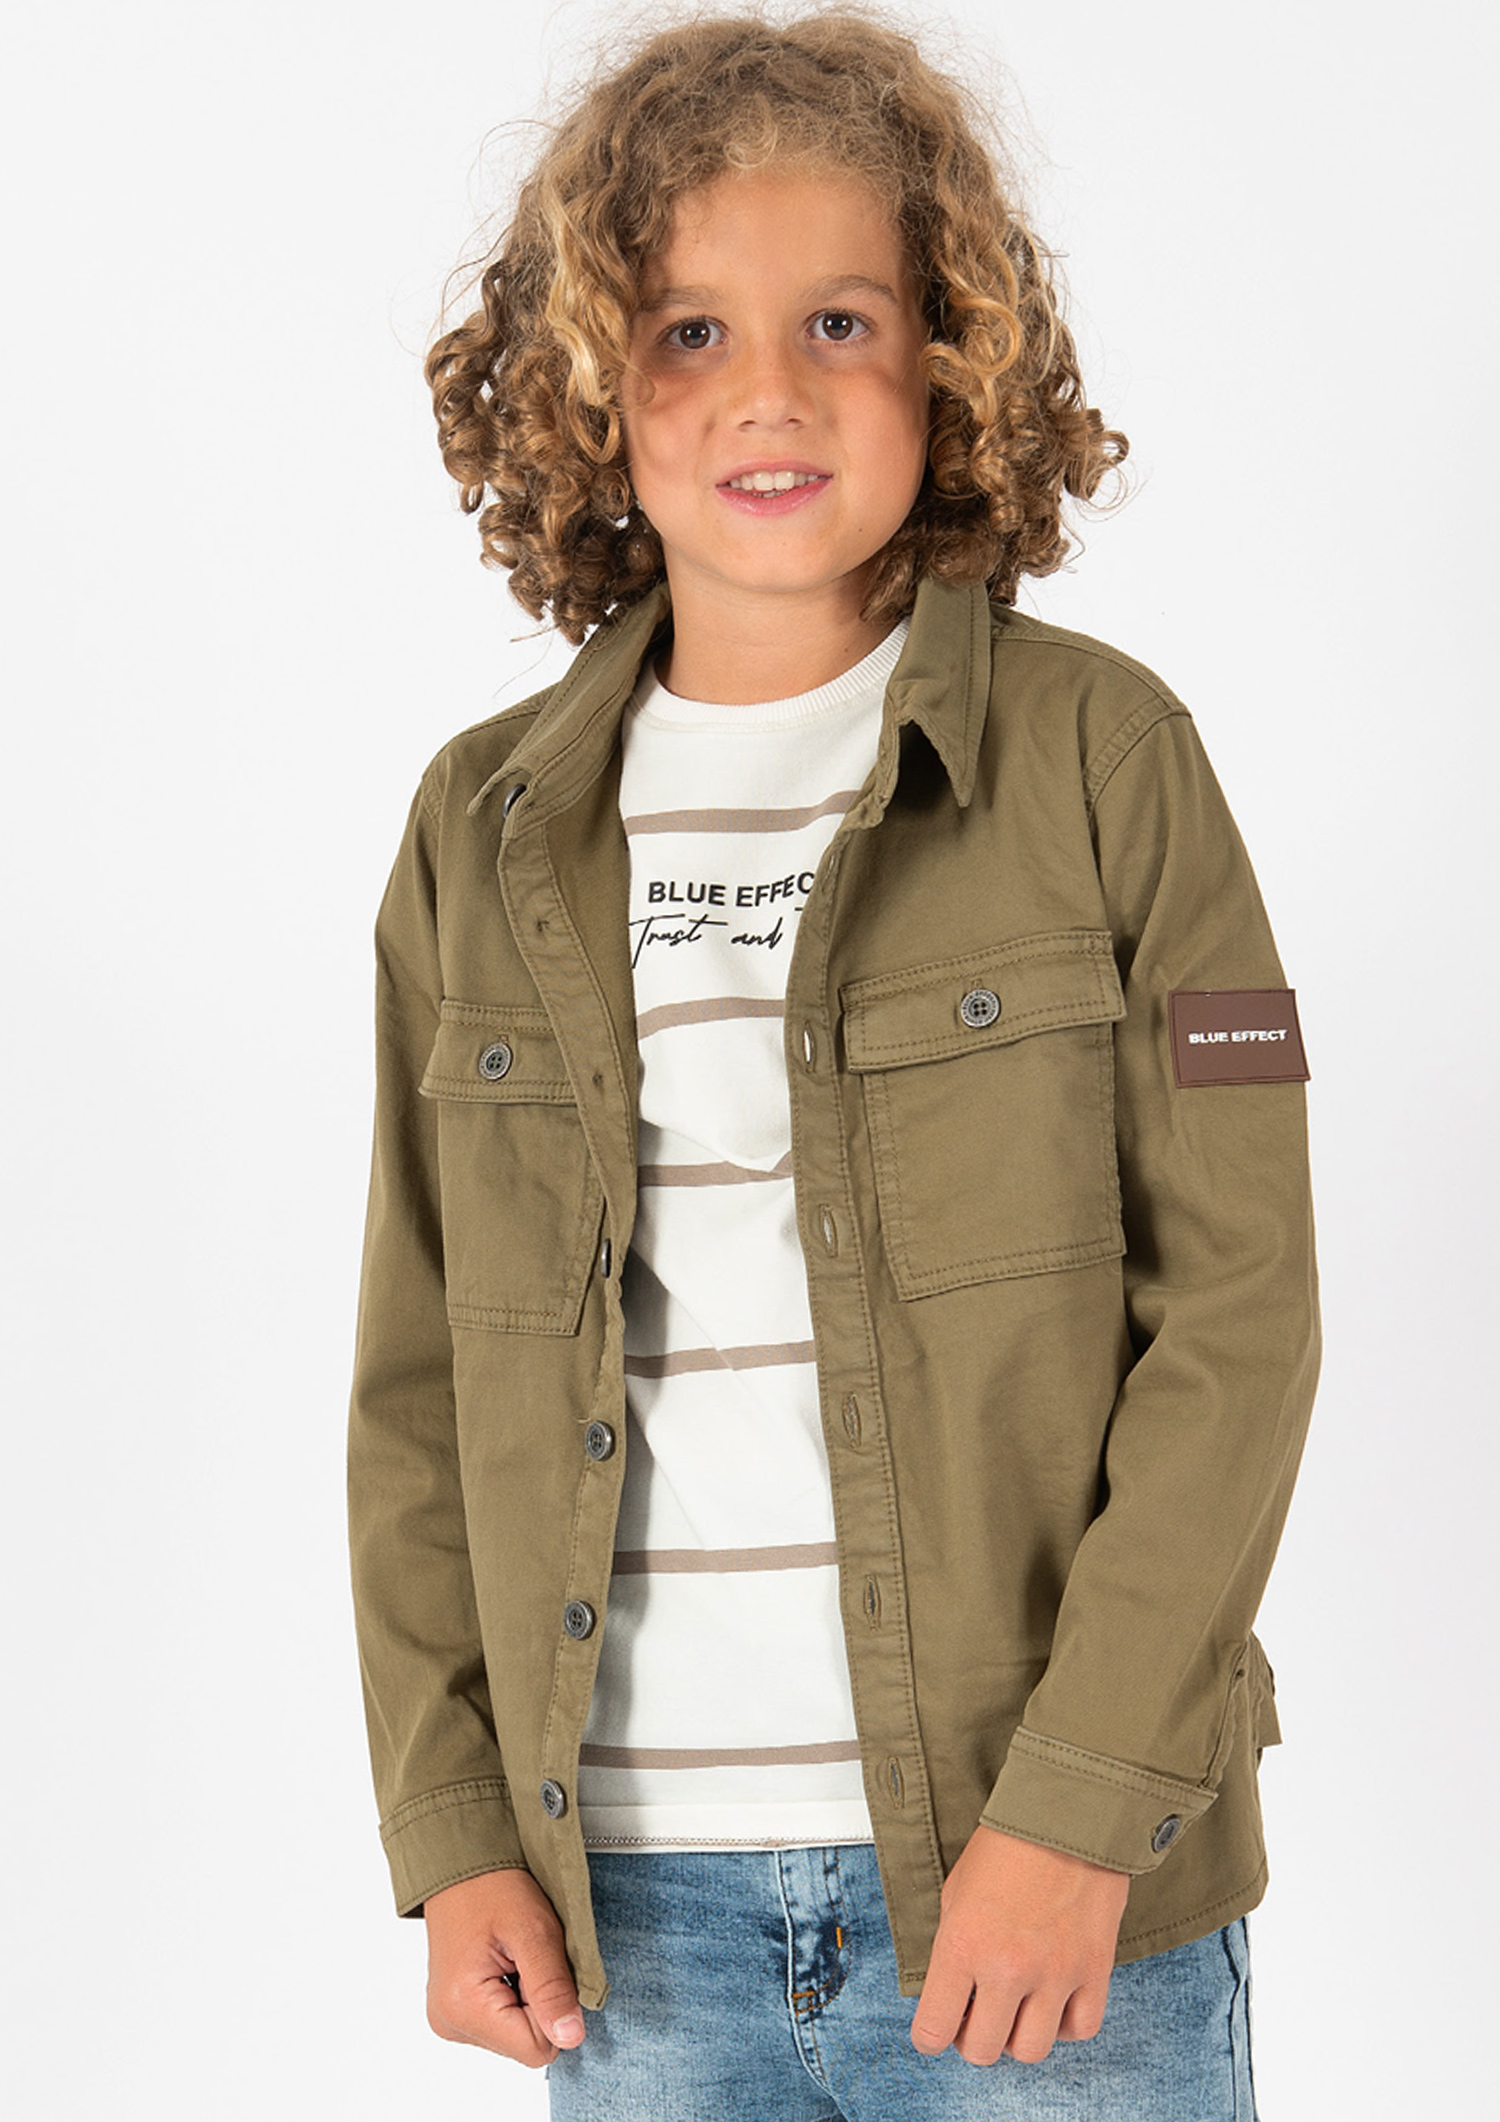 7793-Boys Overshirt -Trust and Try